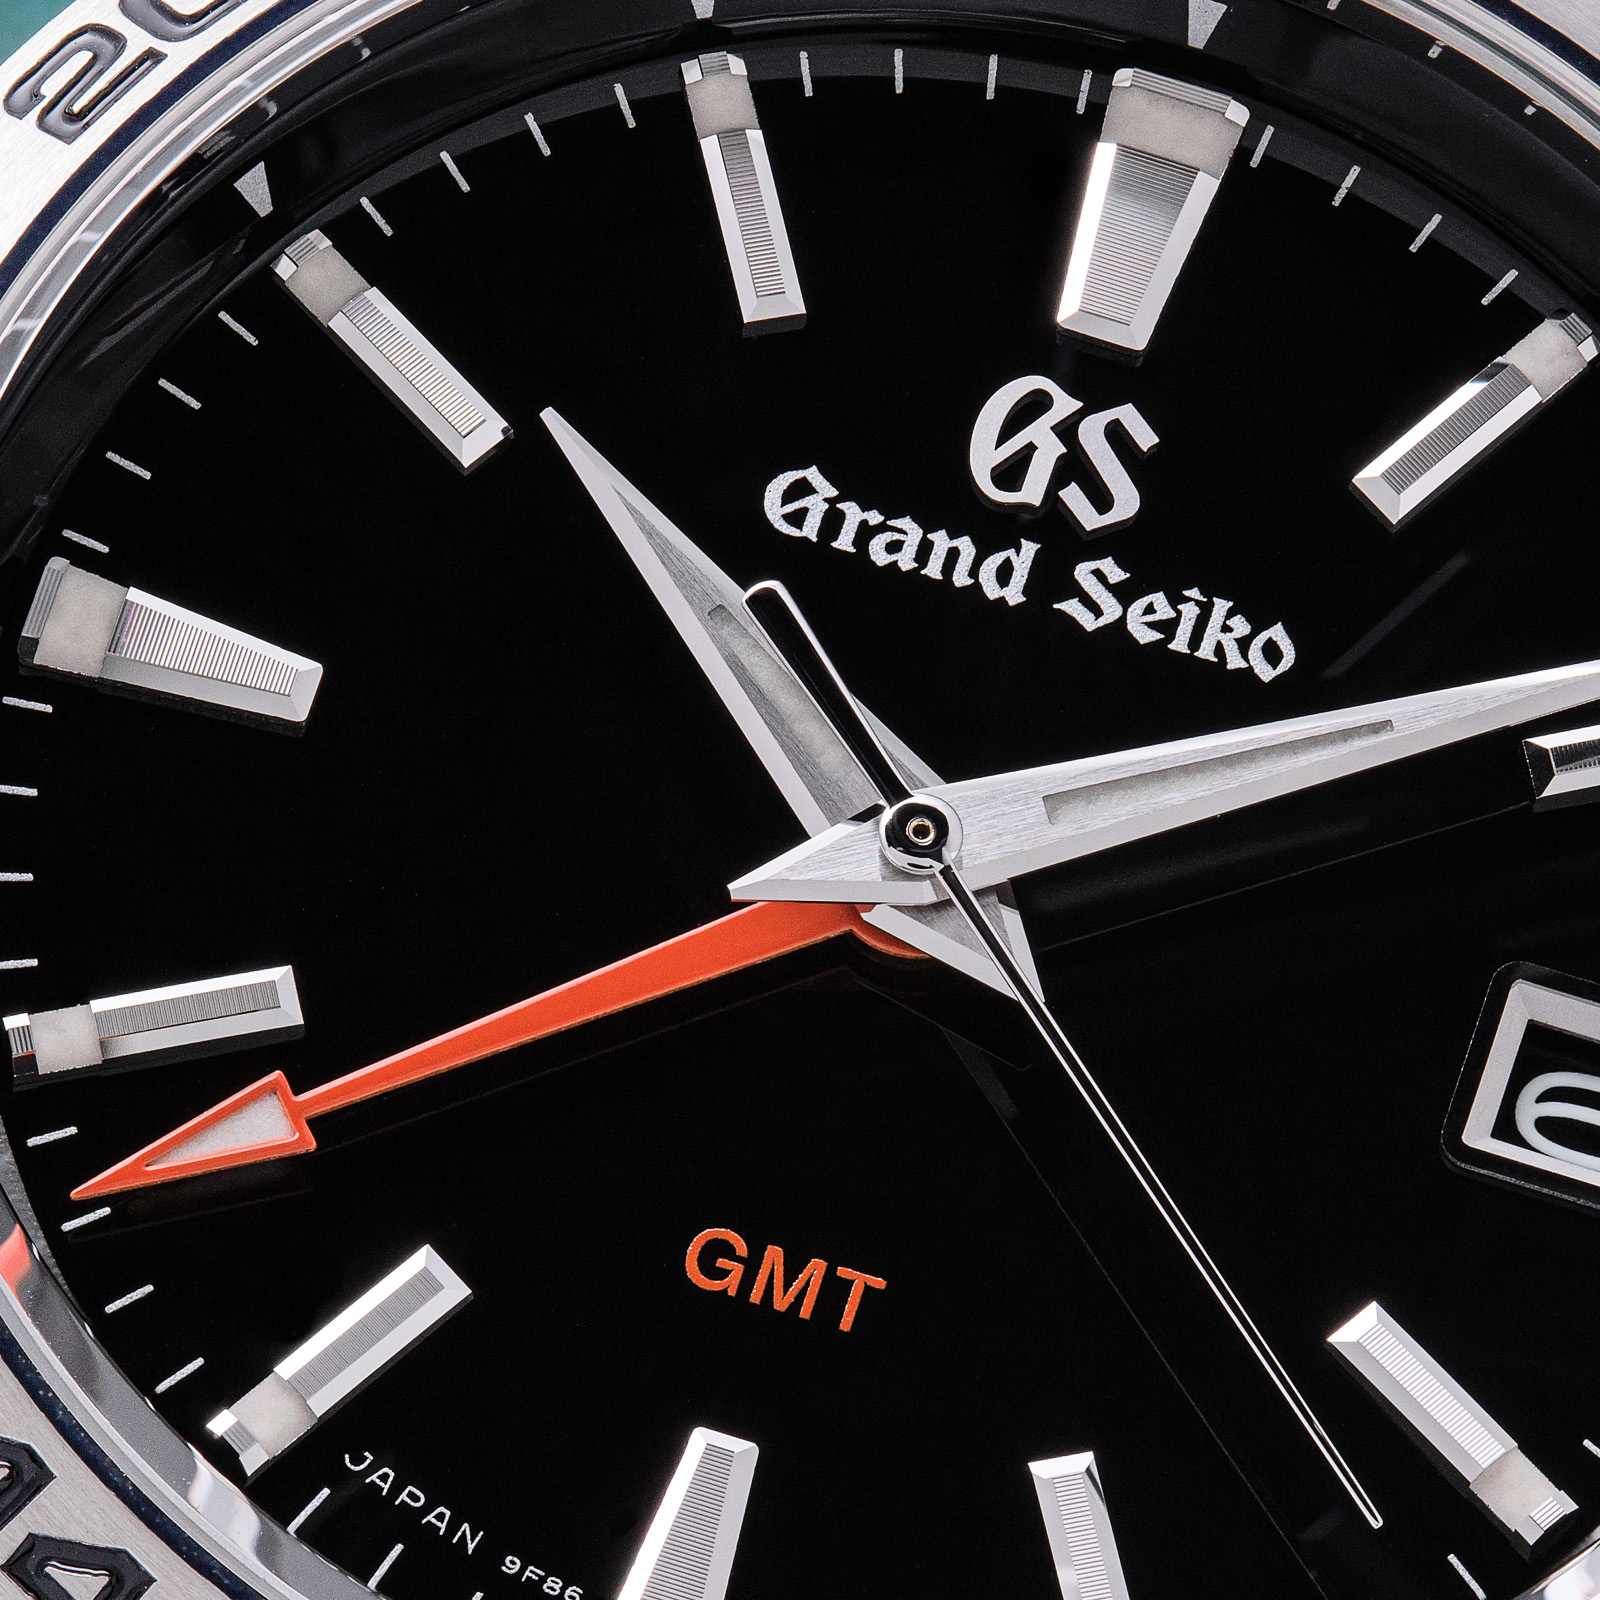 WTS] Grand Seiko 9F86 GMT SBGN003 from 2022 Great Condition! : r